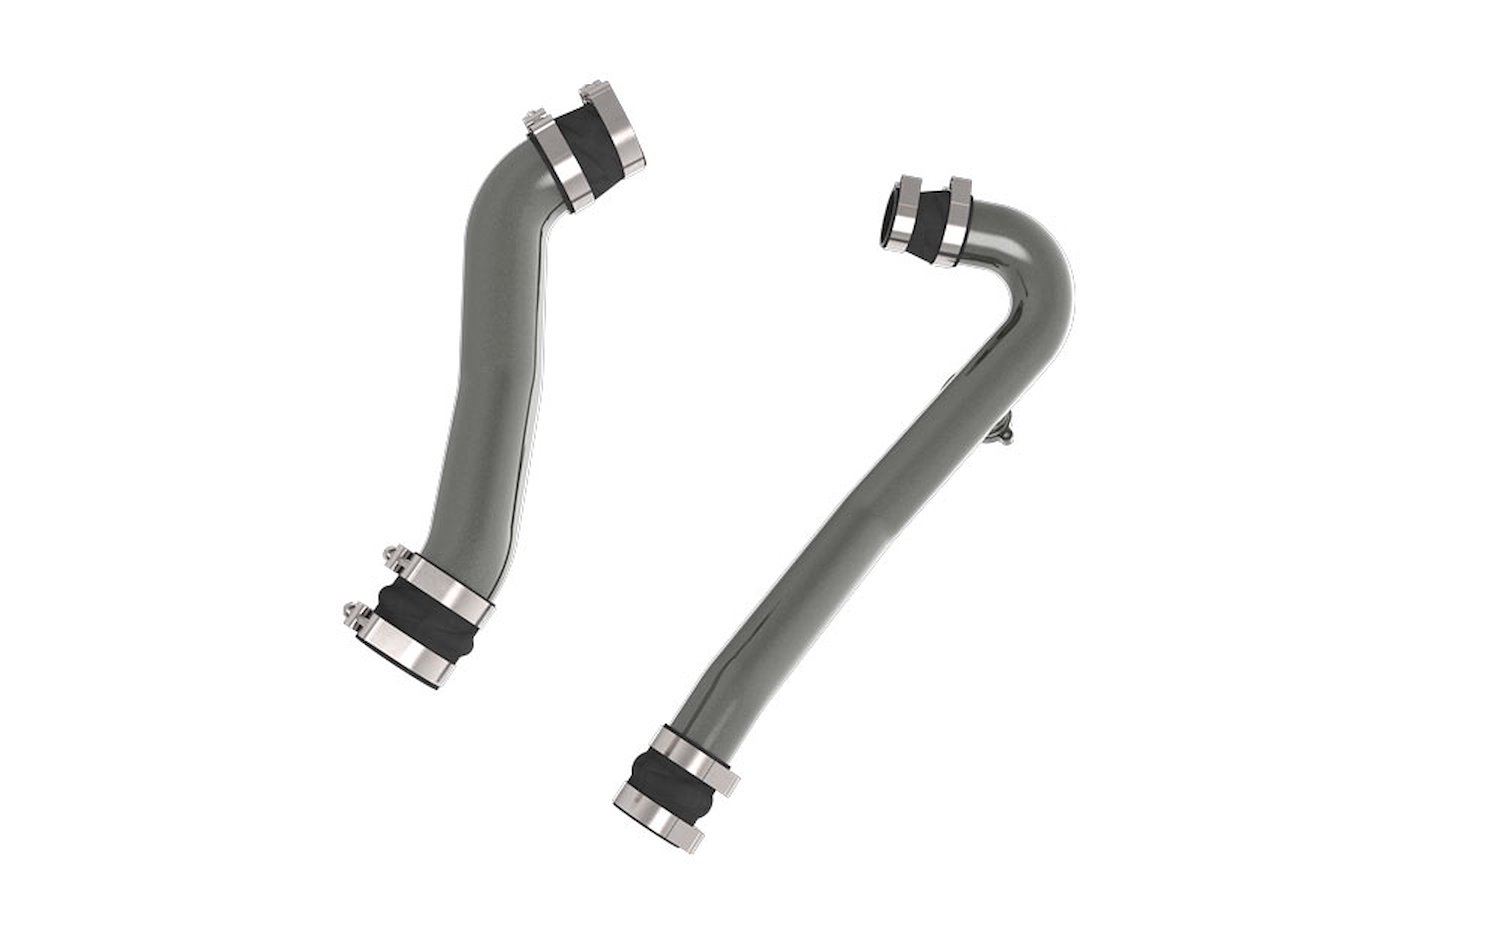 77-1010KC Intercooler Charge Pipe Kit Fits Select Ford Mustangs w/2.3L Ecoboost 4-Cylinder Engines [Gunmetal Finish]